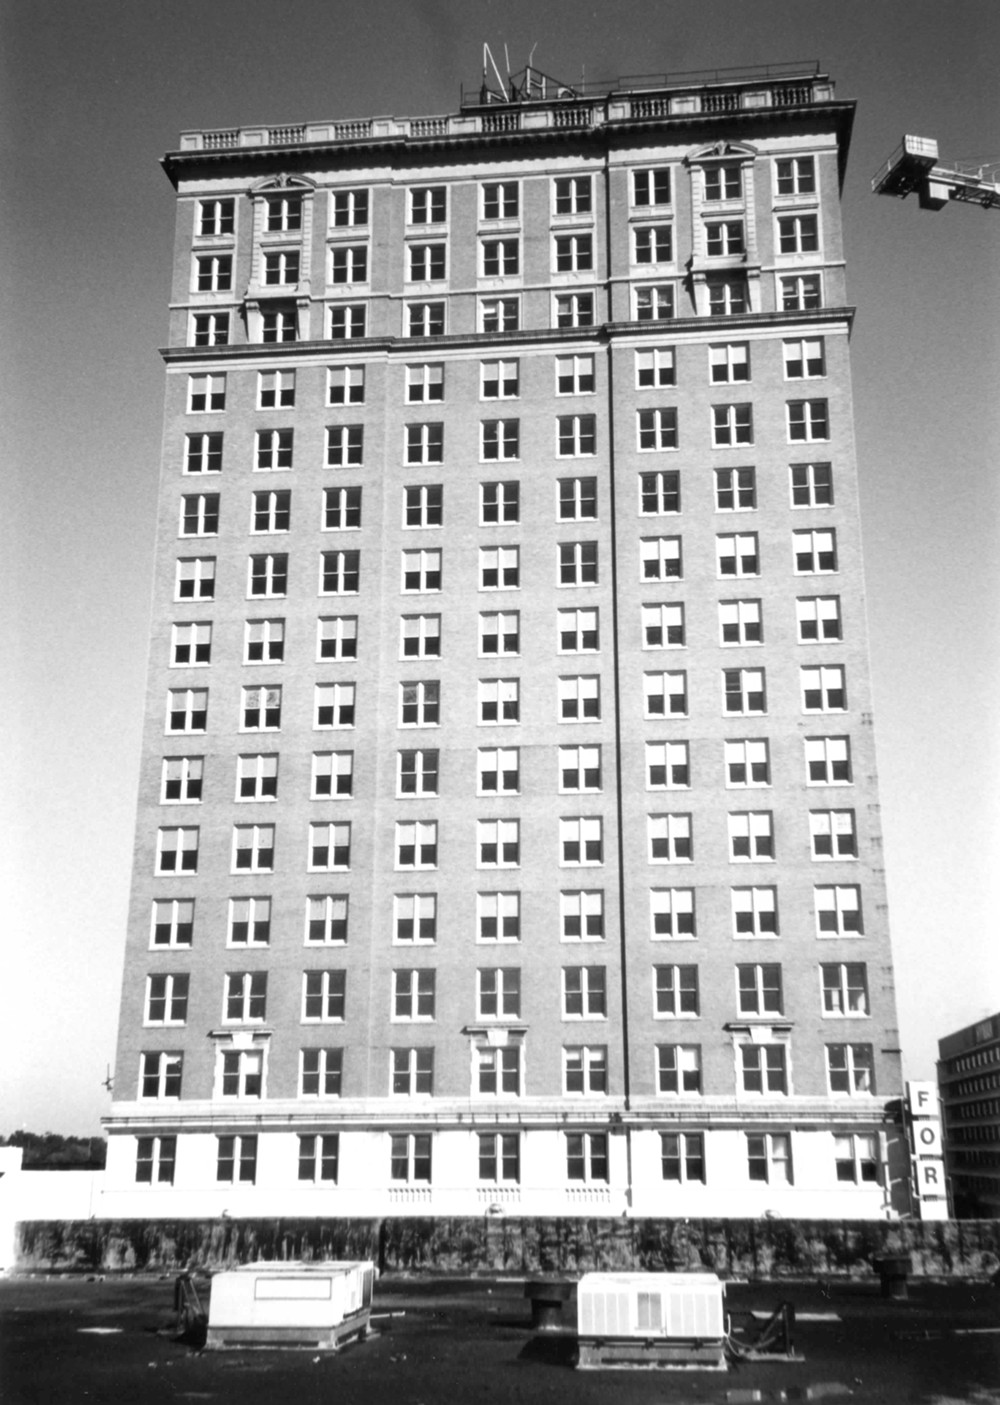 Floridan Hotel, Tampa Florida W elevation of guest room tower looking east (1995)